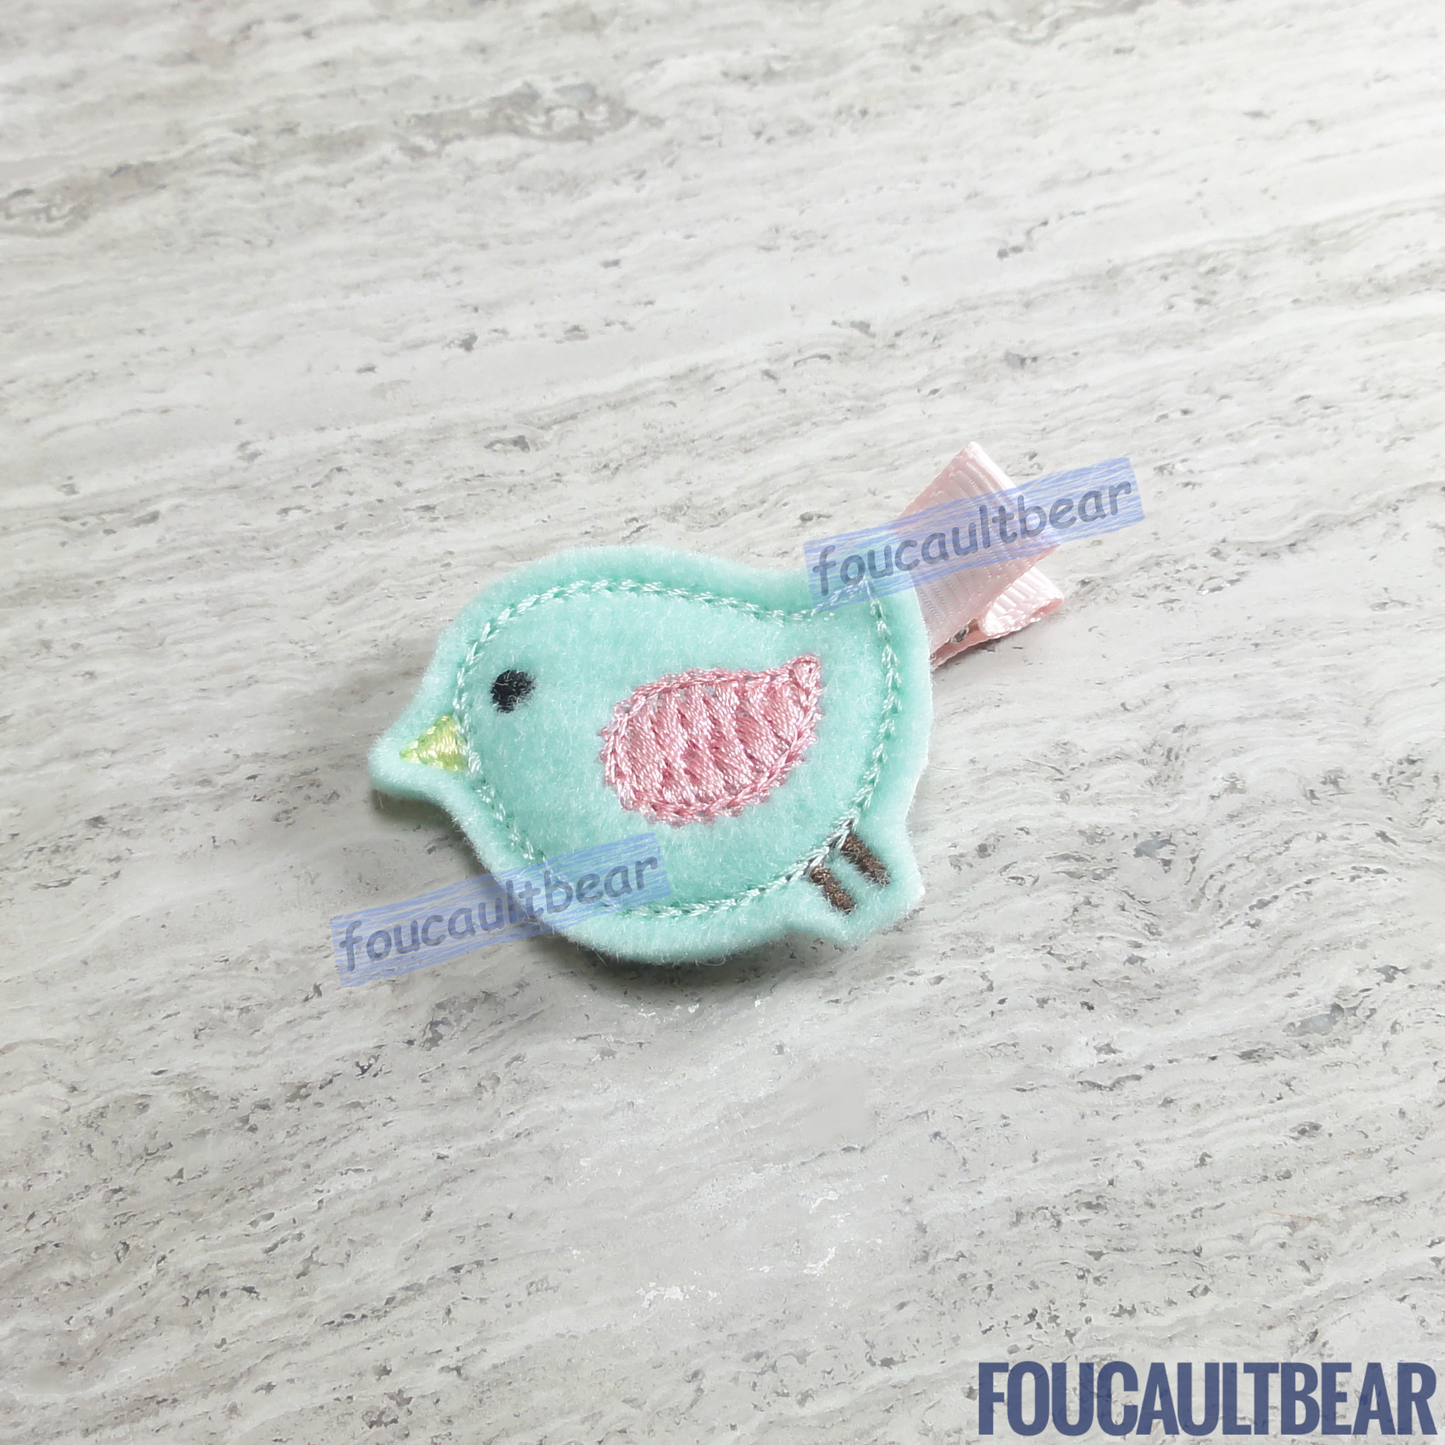 Foucaultbear's HANDMADE HAIR CLIPPIE. Pastel Songbird. Embroidered Soft Felt. Partially Lined Alligator Hair Clip. Super Cute Pastel Songbird Hair Clippie. A nice addition to your little girl's wardrobe. Perfect for toddlers, preschoolers, elementary-schoolers. Absolutely adorable on babies with enough hair to wear it too. Makes for a great baby Shower gift. Definitely not your standard cliché shower gift. Why not be the first to introduce variety to the baby's otherwise boring wardrobe? 